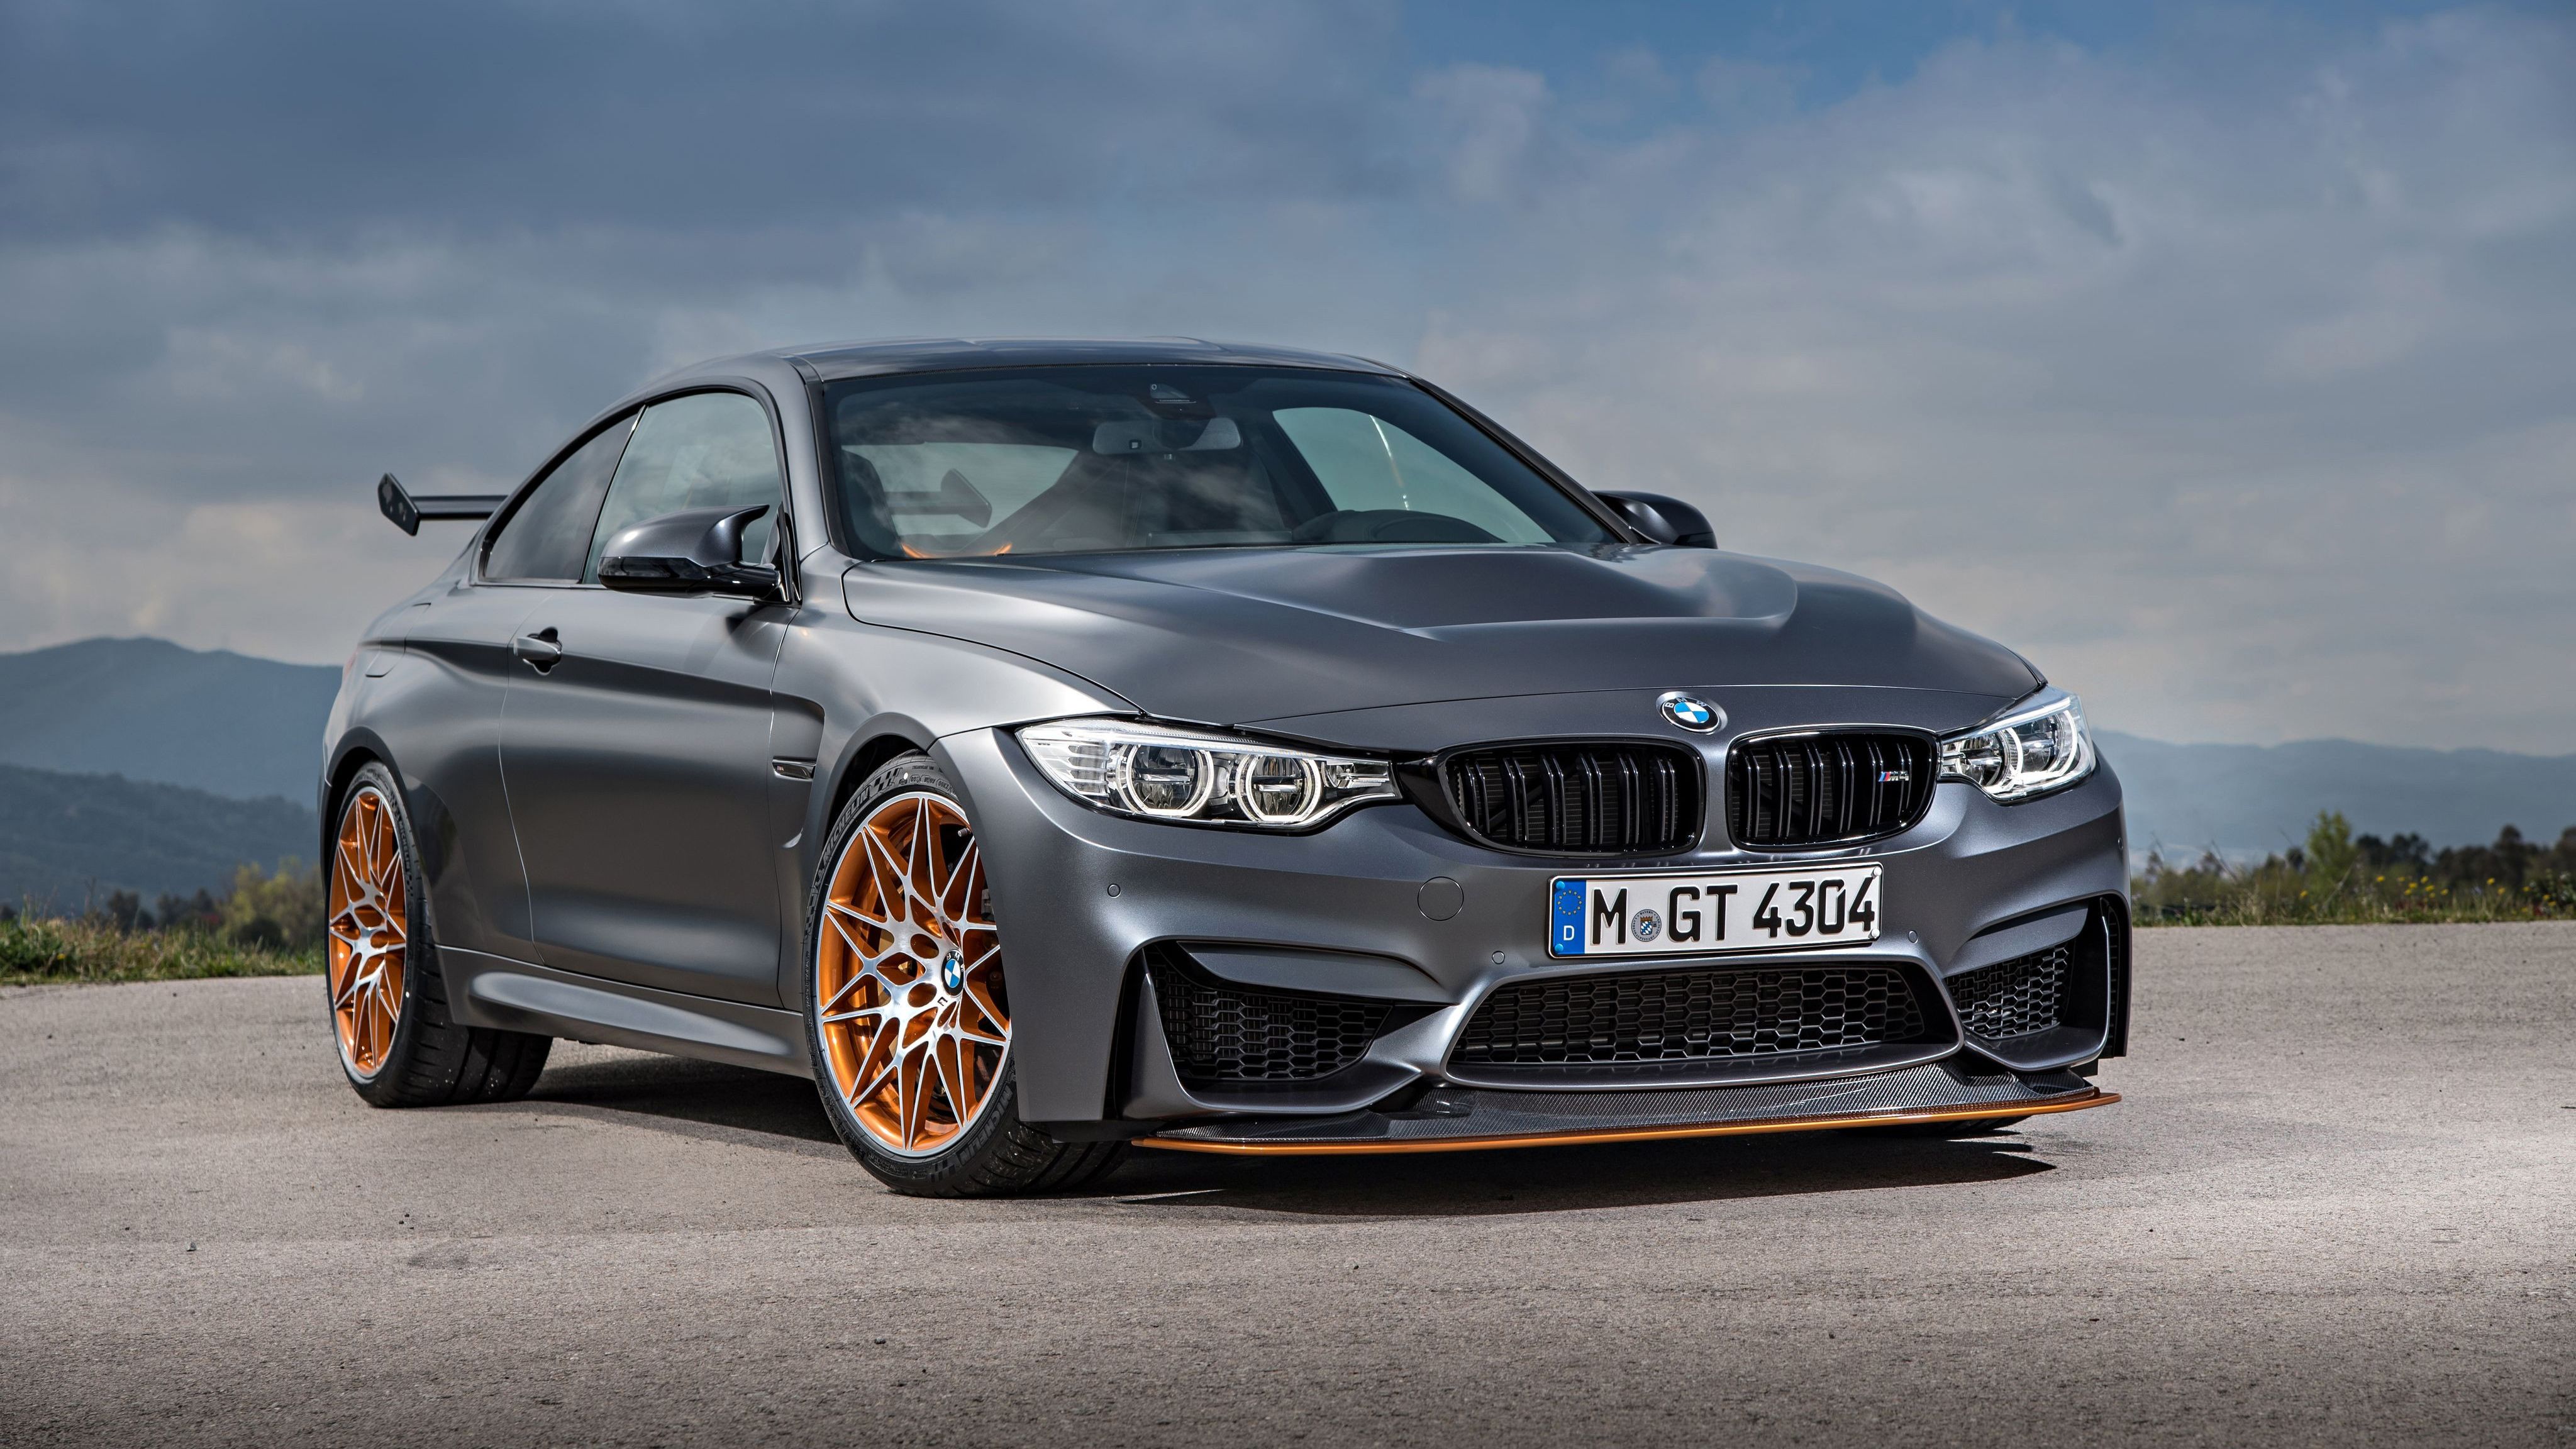 Bmw M4 Gts Wallpapers Wallpaper Cave